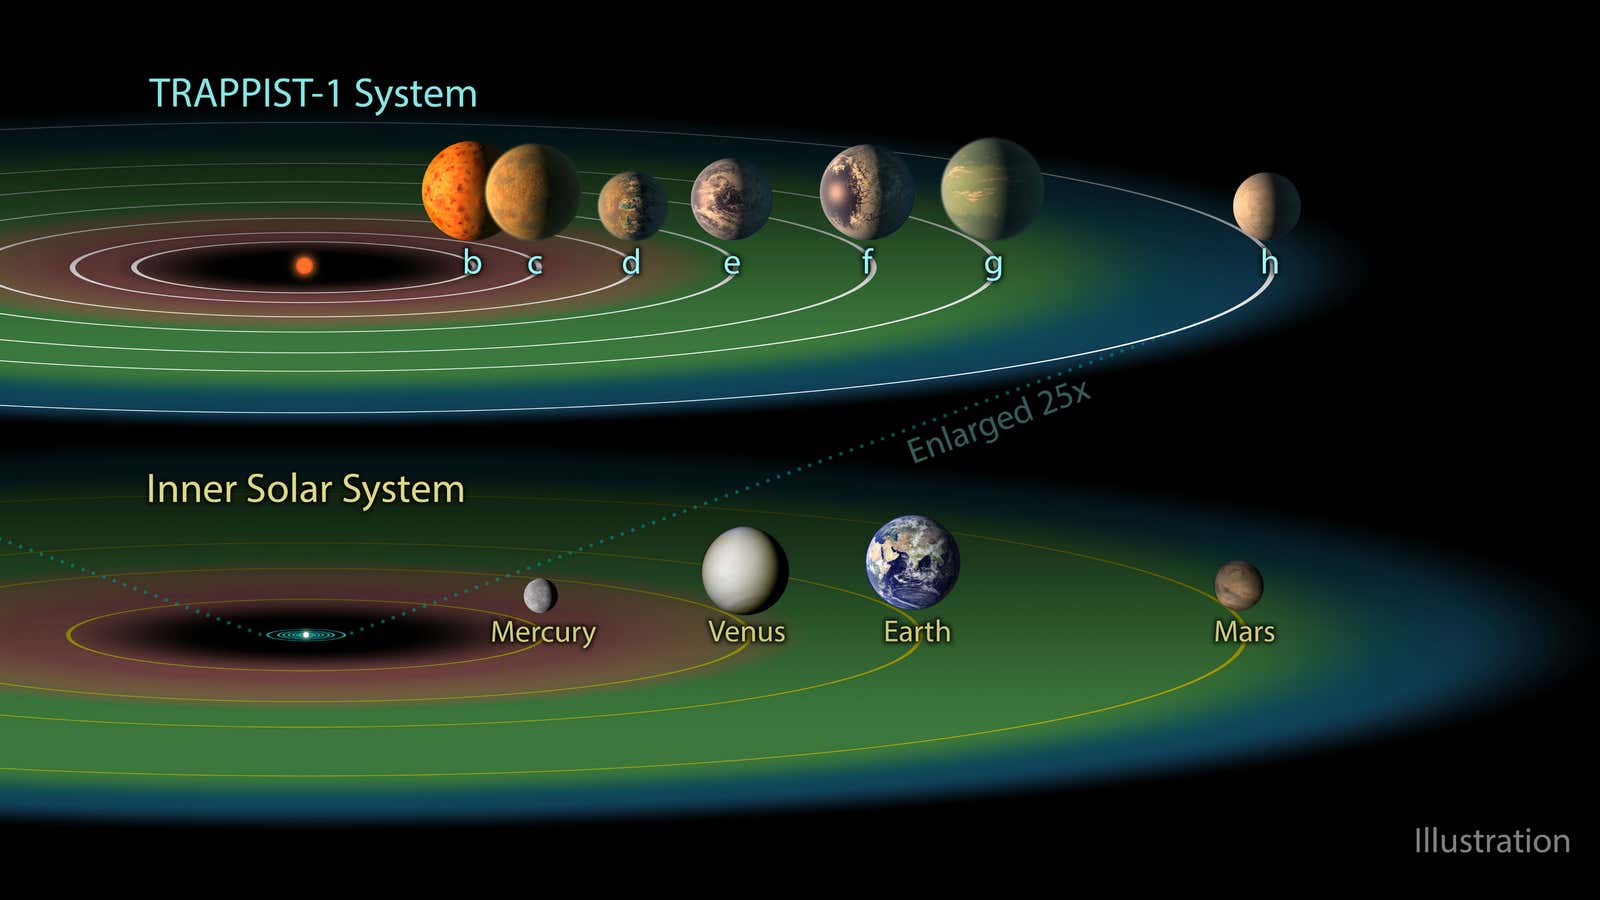 In Trappist-1, planets are much closer together than in our own solar system.